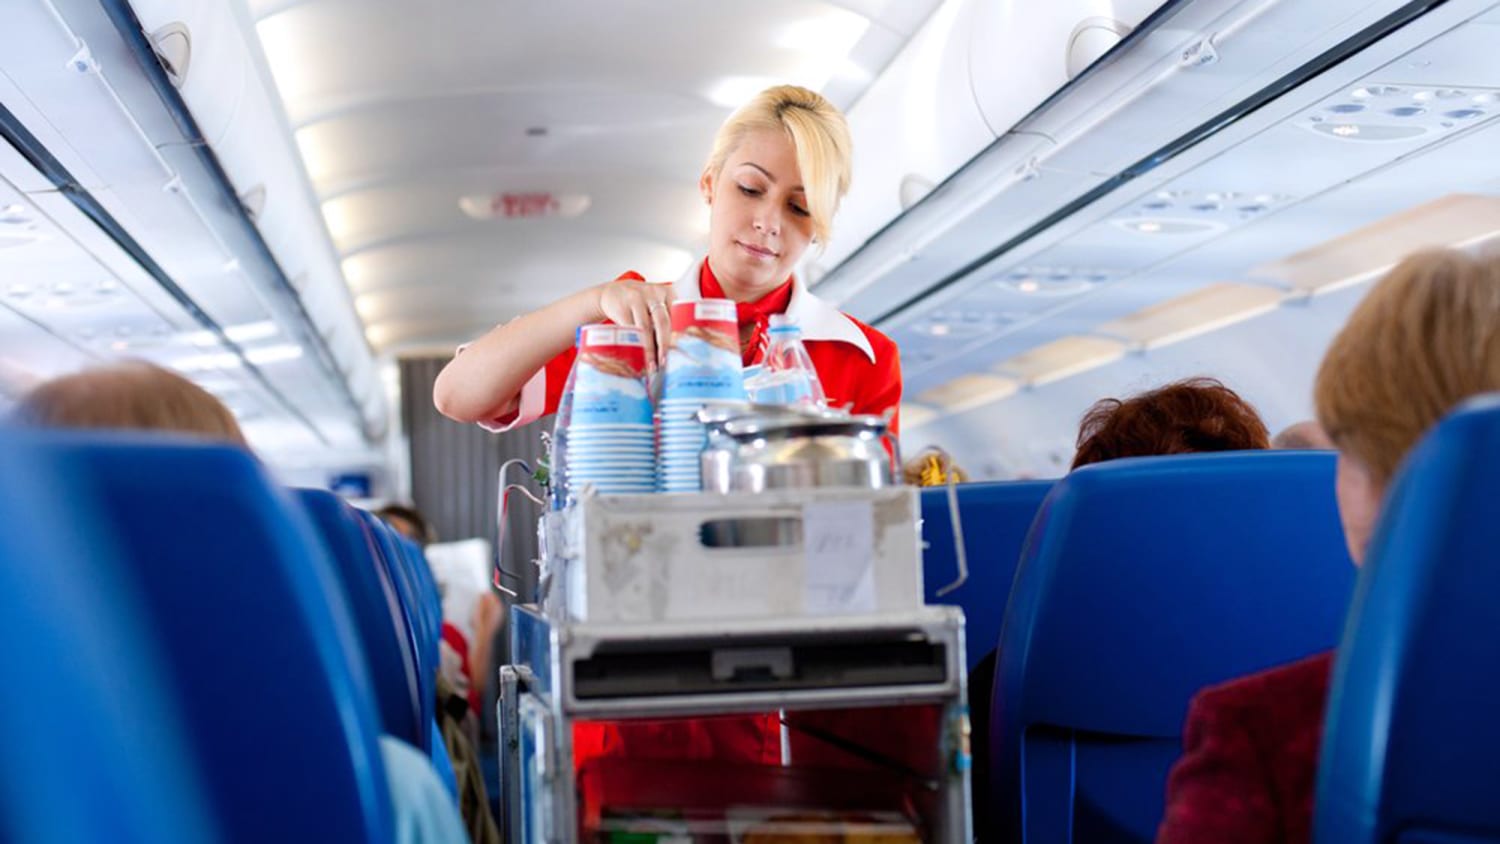 9 Secrets Your Flight Attendant May Be Burning To Tell You 